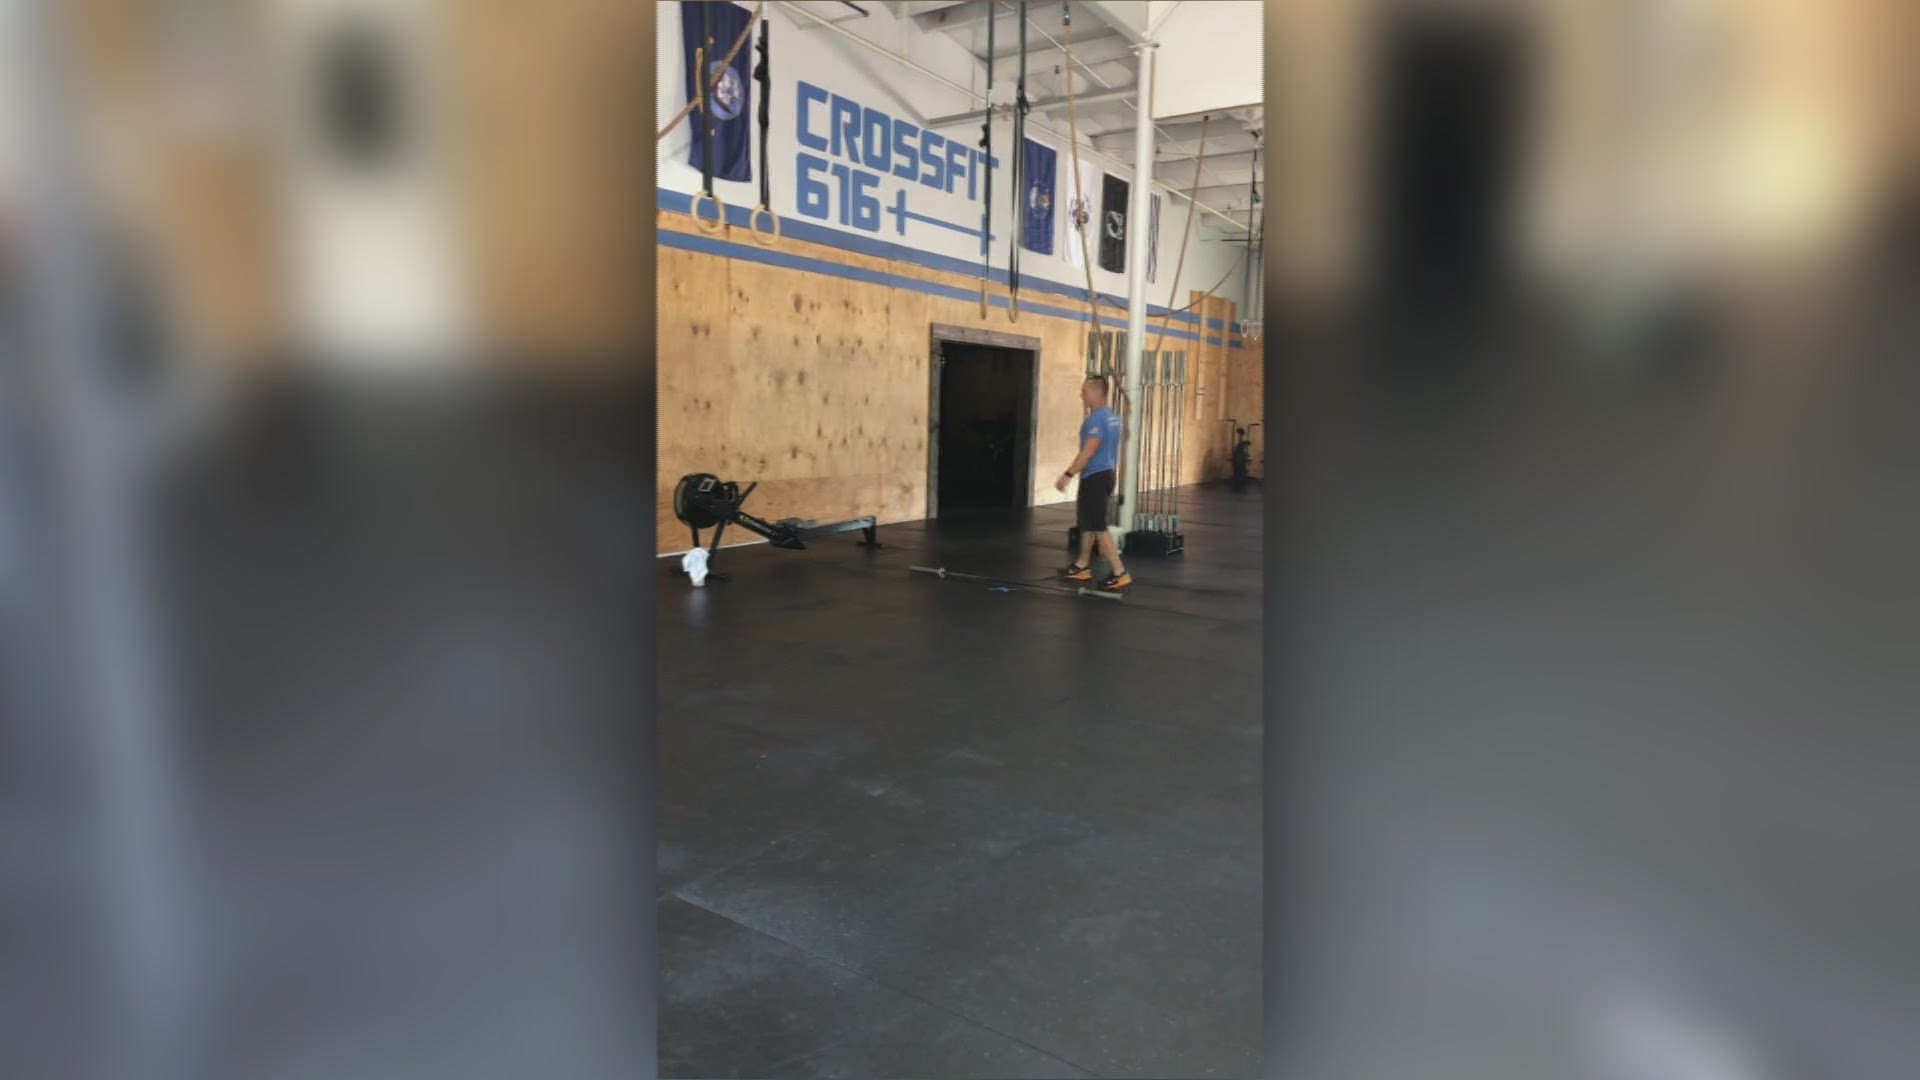 13 ON YOUR SIDE spoke with the owner of Crossfit 616 about how the reopening process is going.